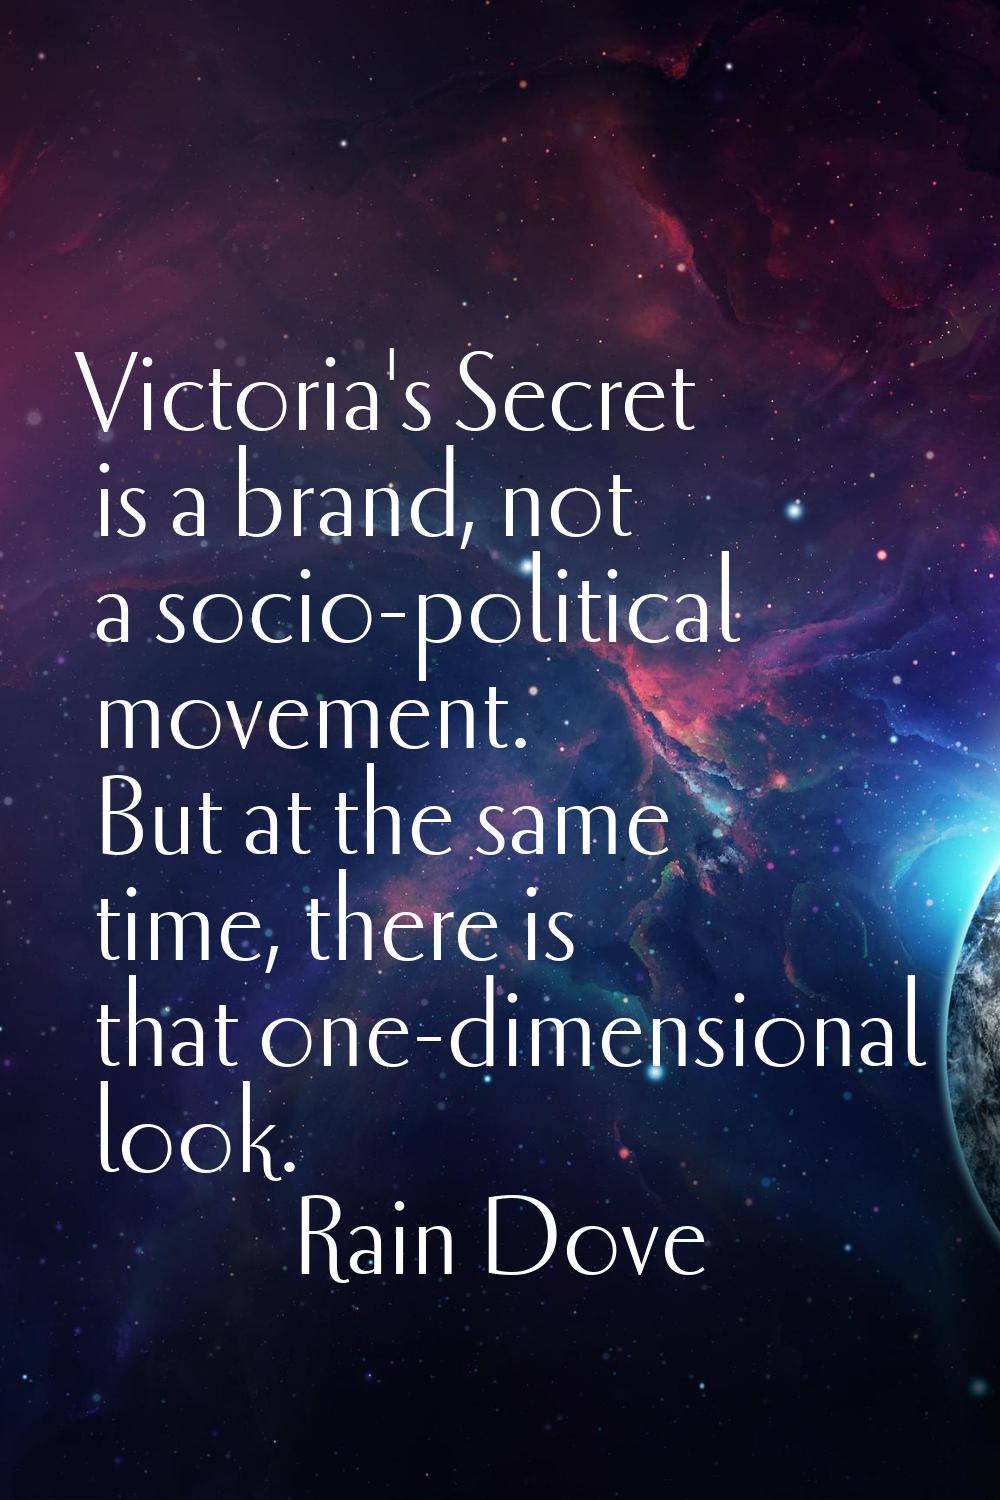 Victoria's Secret is a brand, not a socio-political movement. But at the same time, there is that o